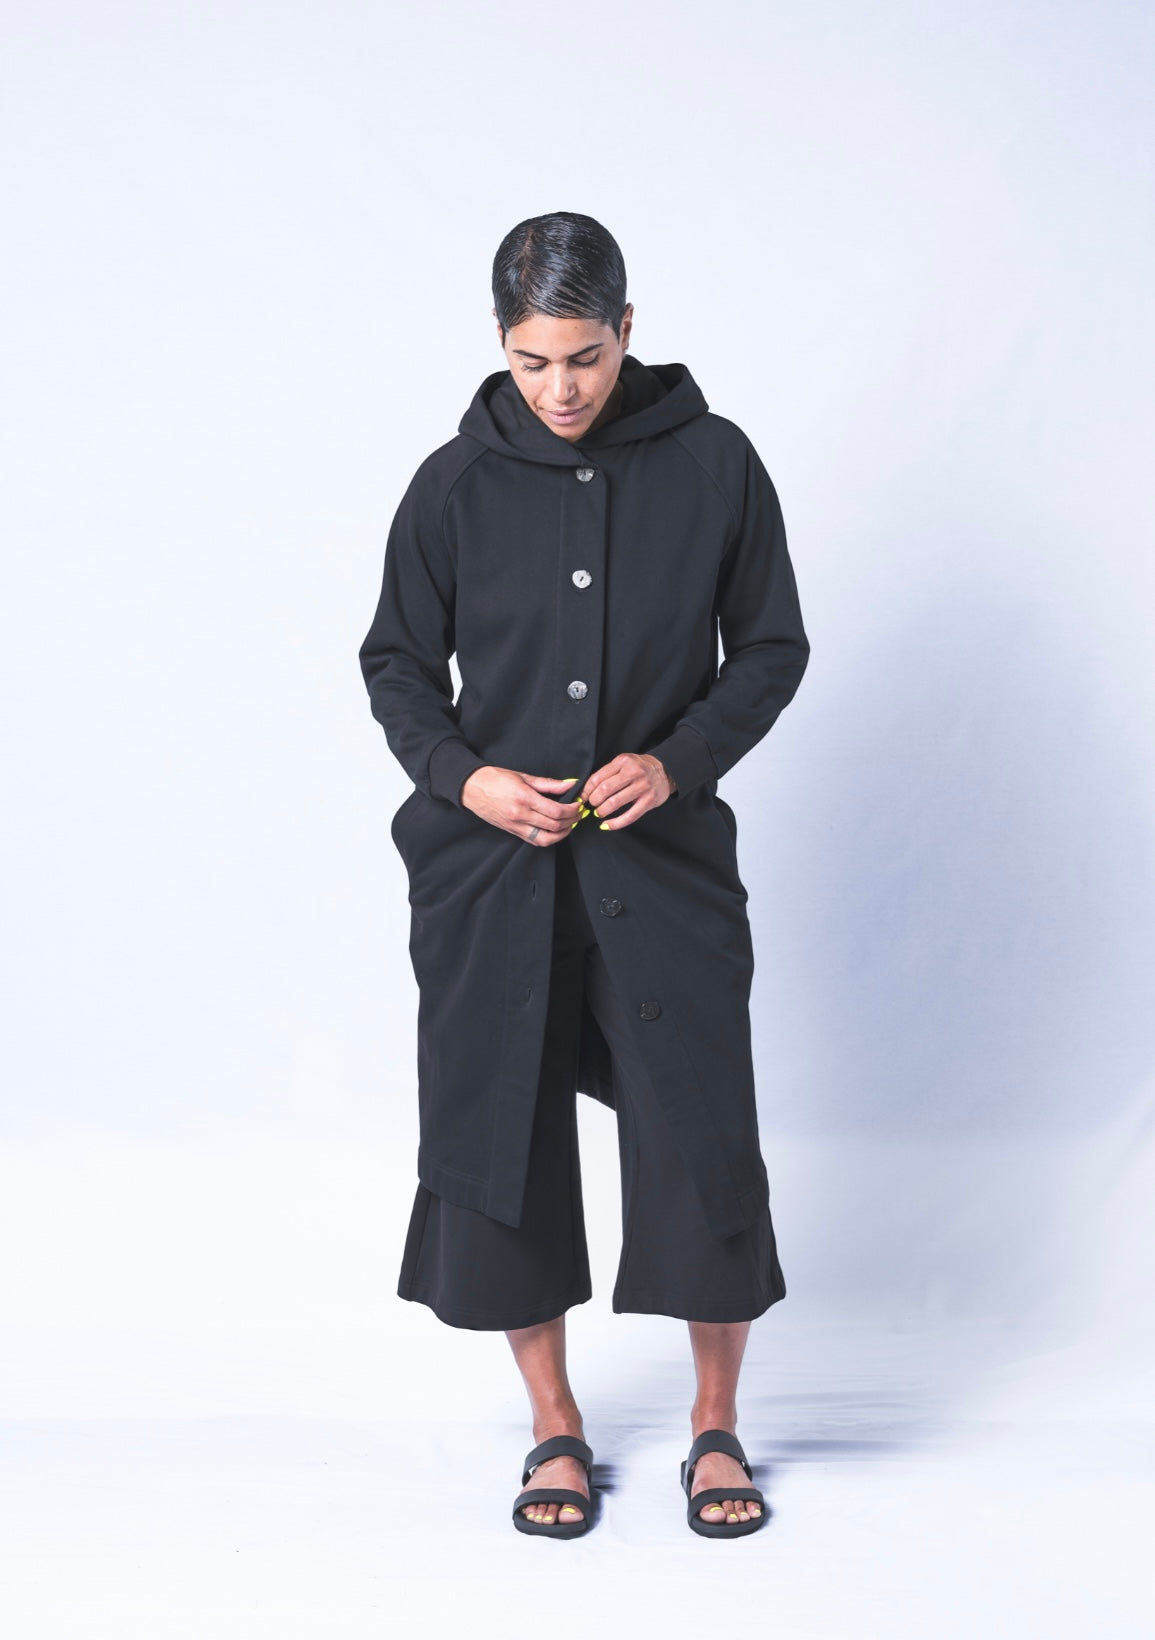 Somewhere between a cardigan and a coat...Its a Coatigan! Hand-picked black cotton poly blend fabric ensures lasting comfort no matter how many times you wash it. Features oversized hood for extra comfort and pearl button closure. Sizes Small-Large available.